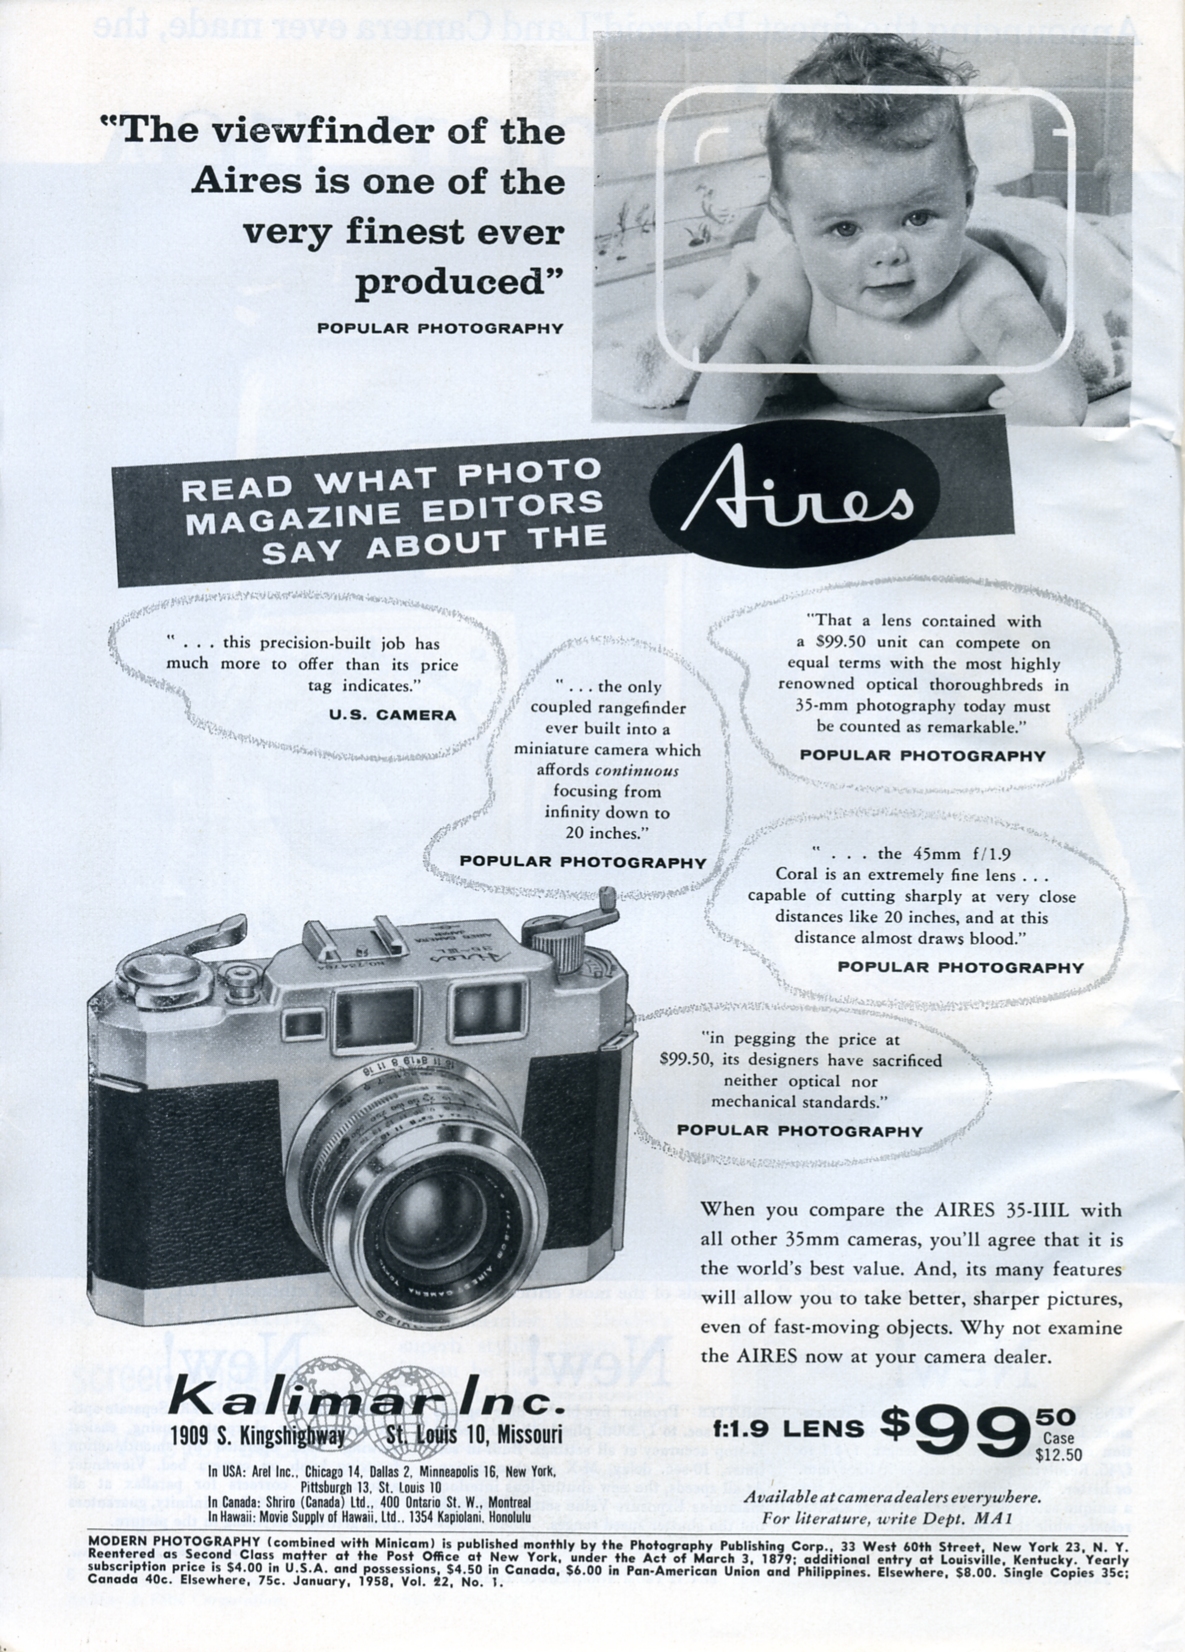 the advertit for a baby pographer, including a toy camera